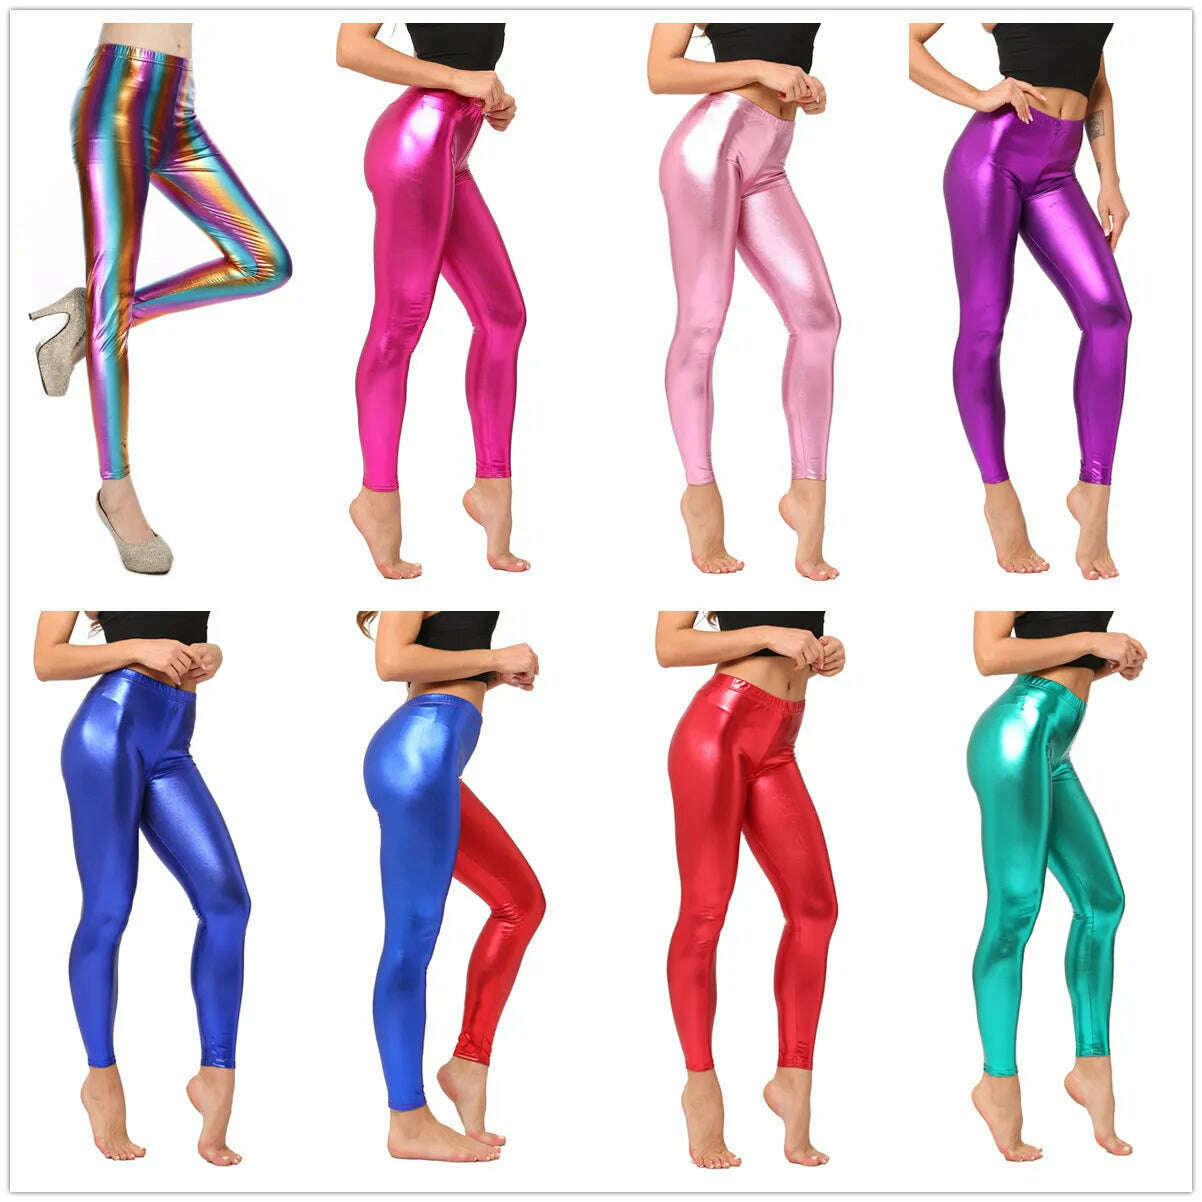 KIMLUD, Metallic Color PU Leggings Women Faux Leather Pants Dancing Party Pant Sexy Night Club Skinny Costume Pants Tight Trousers, KIMLUD Women's Clothes